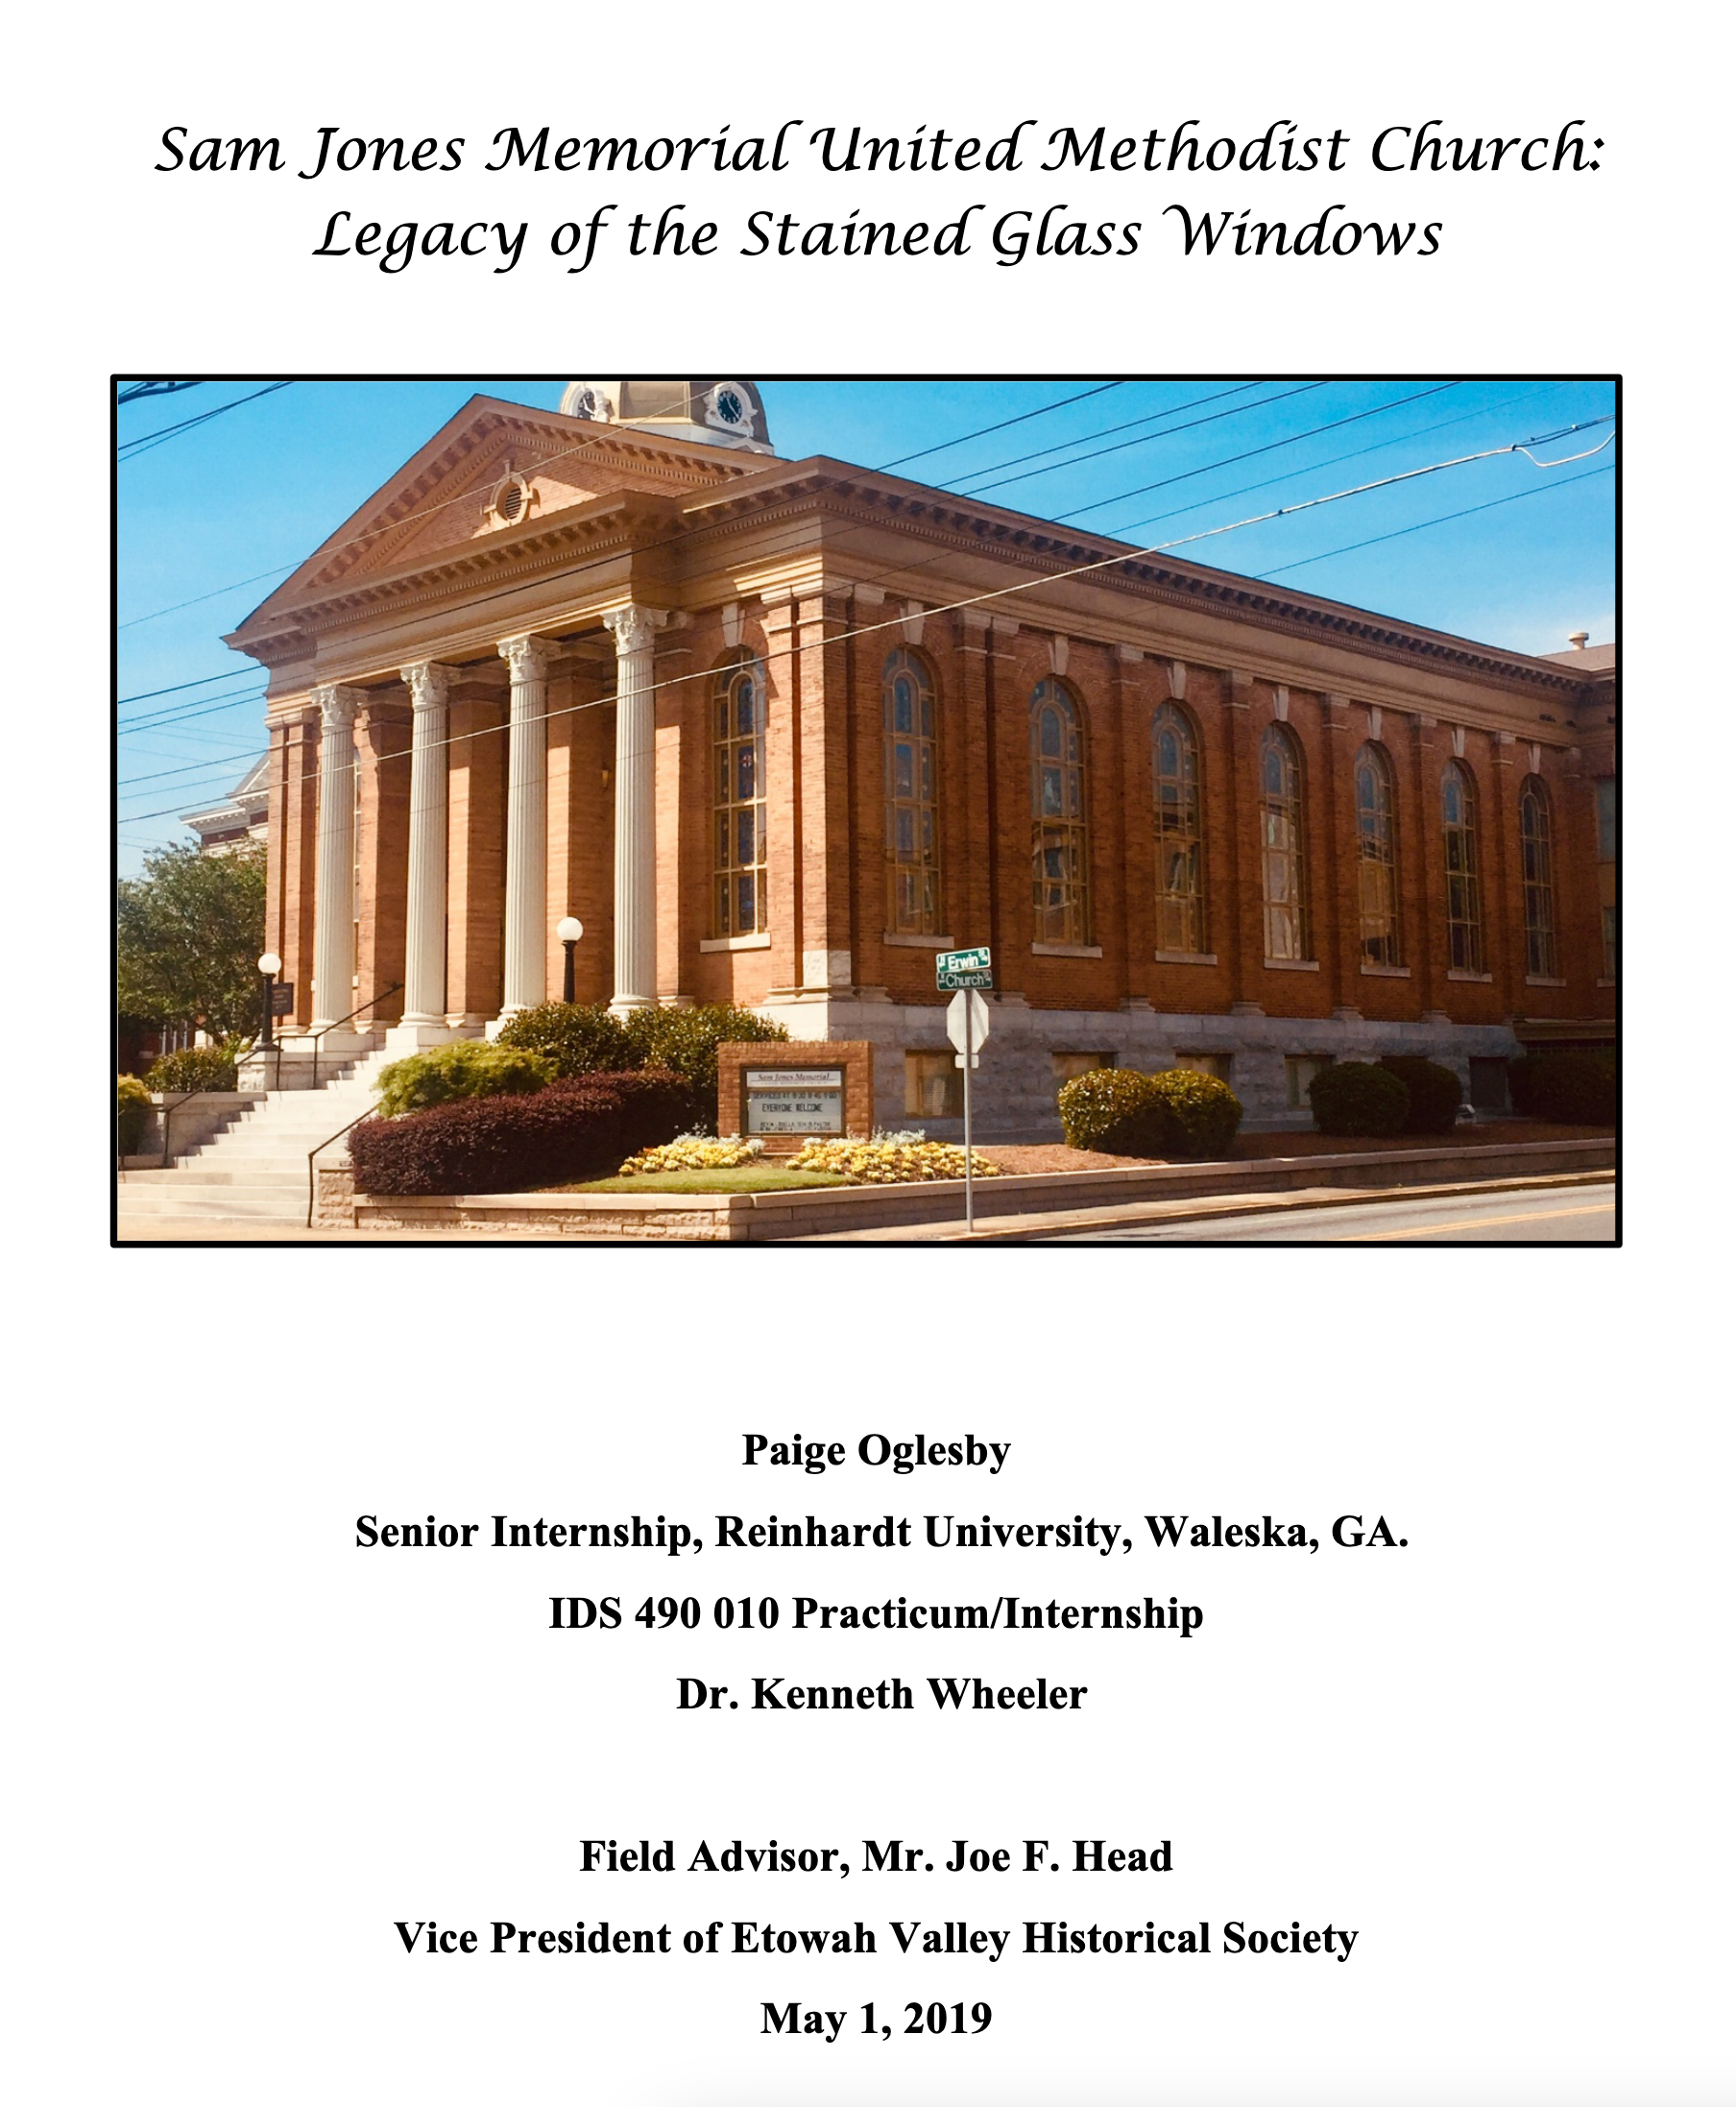 Sam Jones Memorial United Methodist Church: Legacy of the Stained Glass Windows – Paige Oglesby